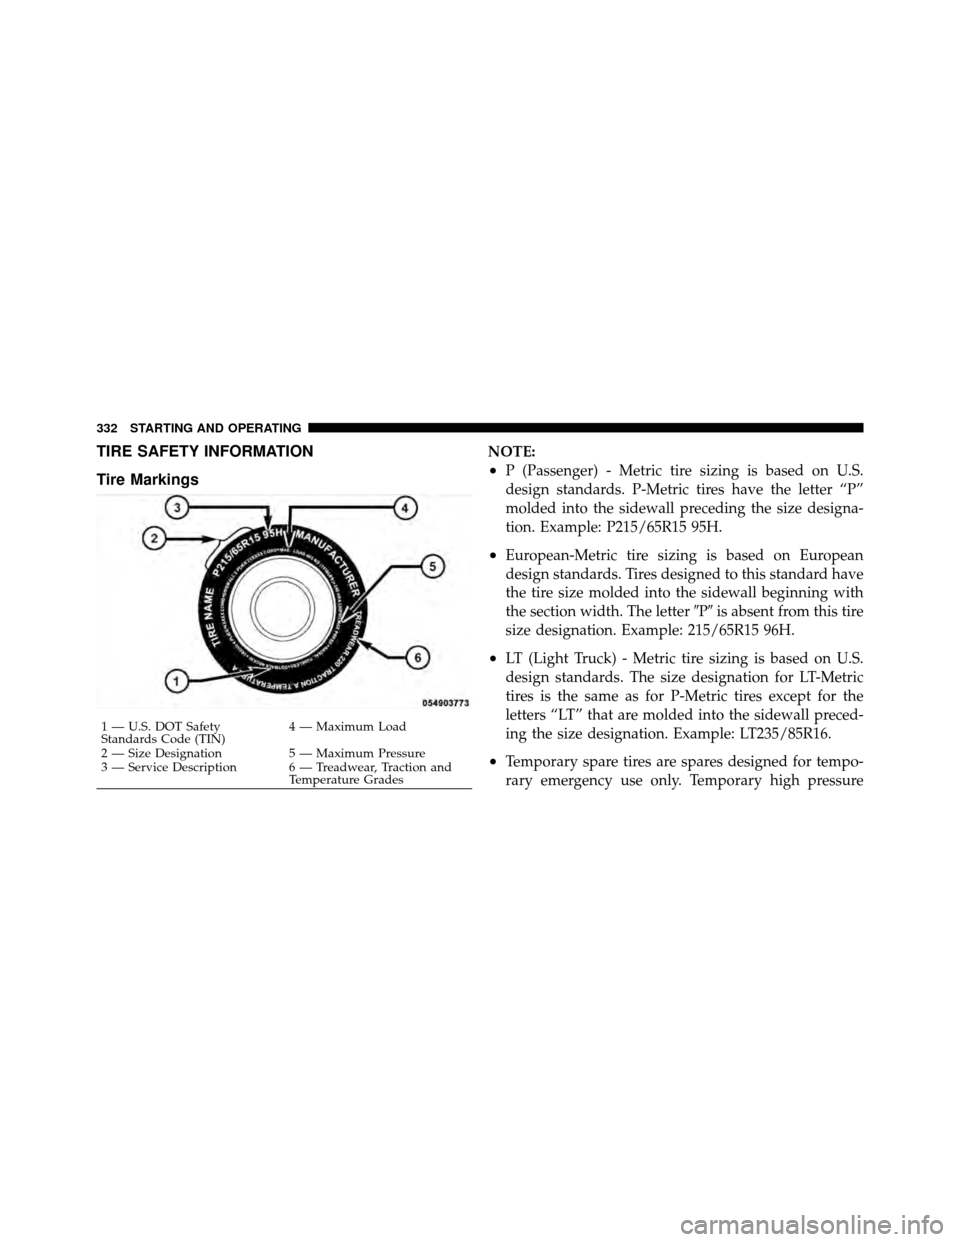 CHRYSLER 200 2012 1.G Owners Manual TIRE SAFETY INFORMATION
Tire MarkingsNOTE:
•P (Passenger) - Metric tire sizing is based on U.S.
design standards. P-Metric tires have the letter “P”
molded into the sidewall preceding the size d